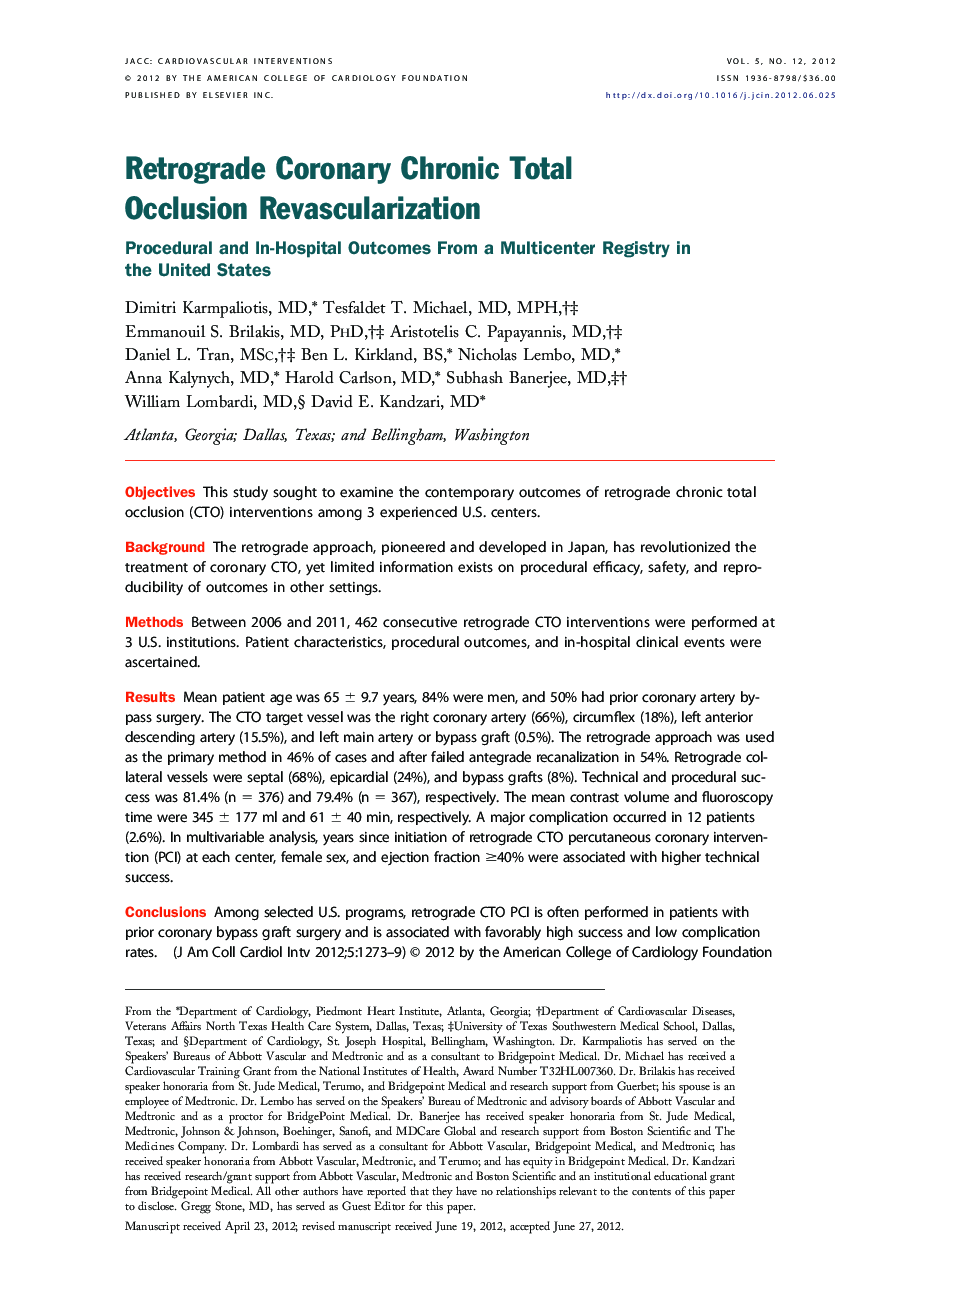 Retrograde Coronary Chronic Total Occlusion Revascularization : Procedural and In-Hospital Outcomes From a Multicenter Registry in the United States